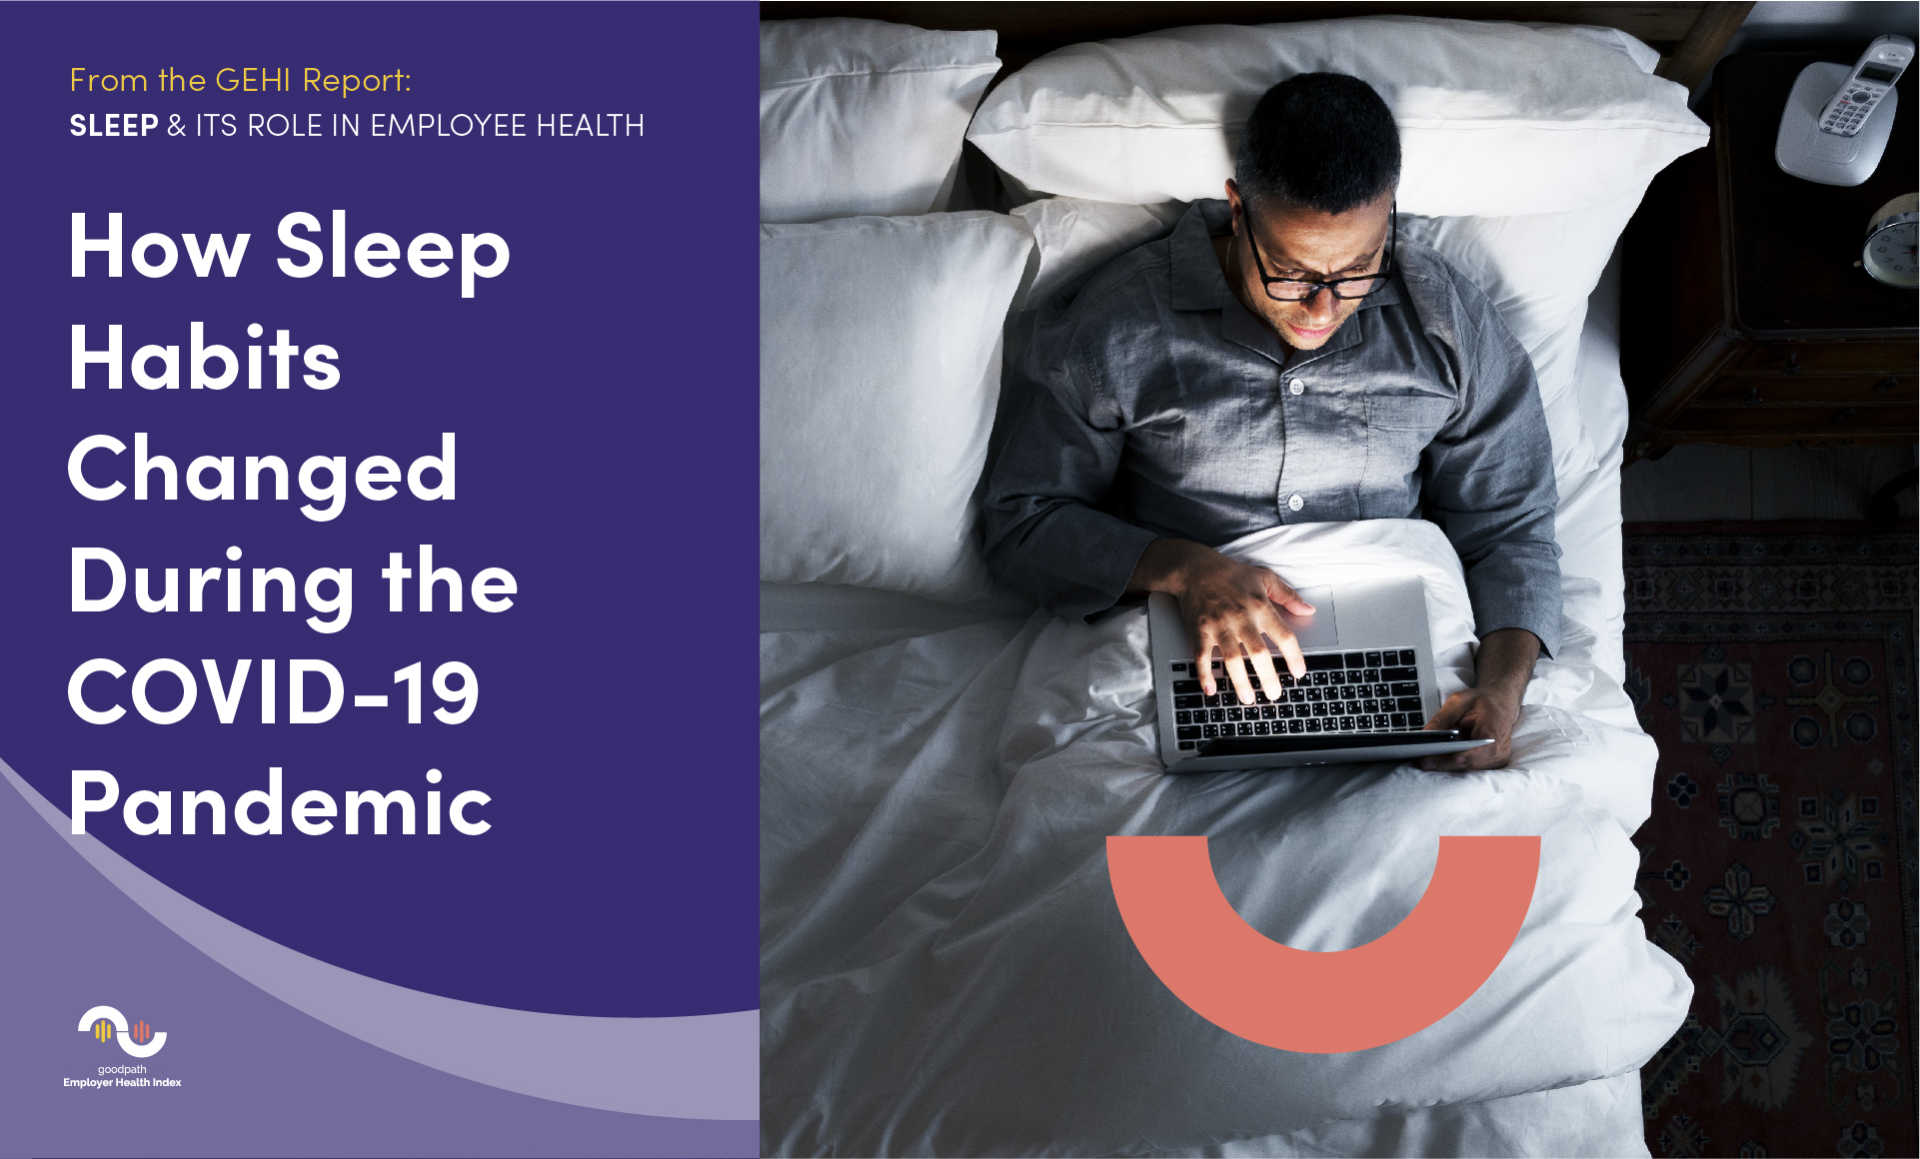 How Sleep Habits Changed During the COVID-19 Pandemic